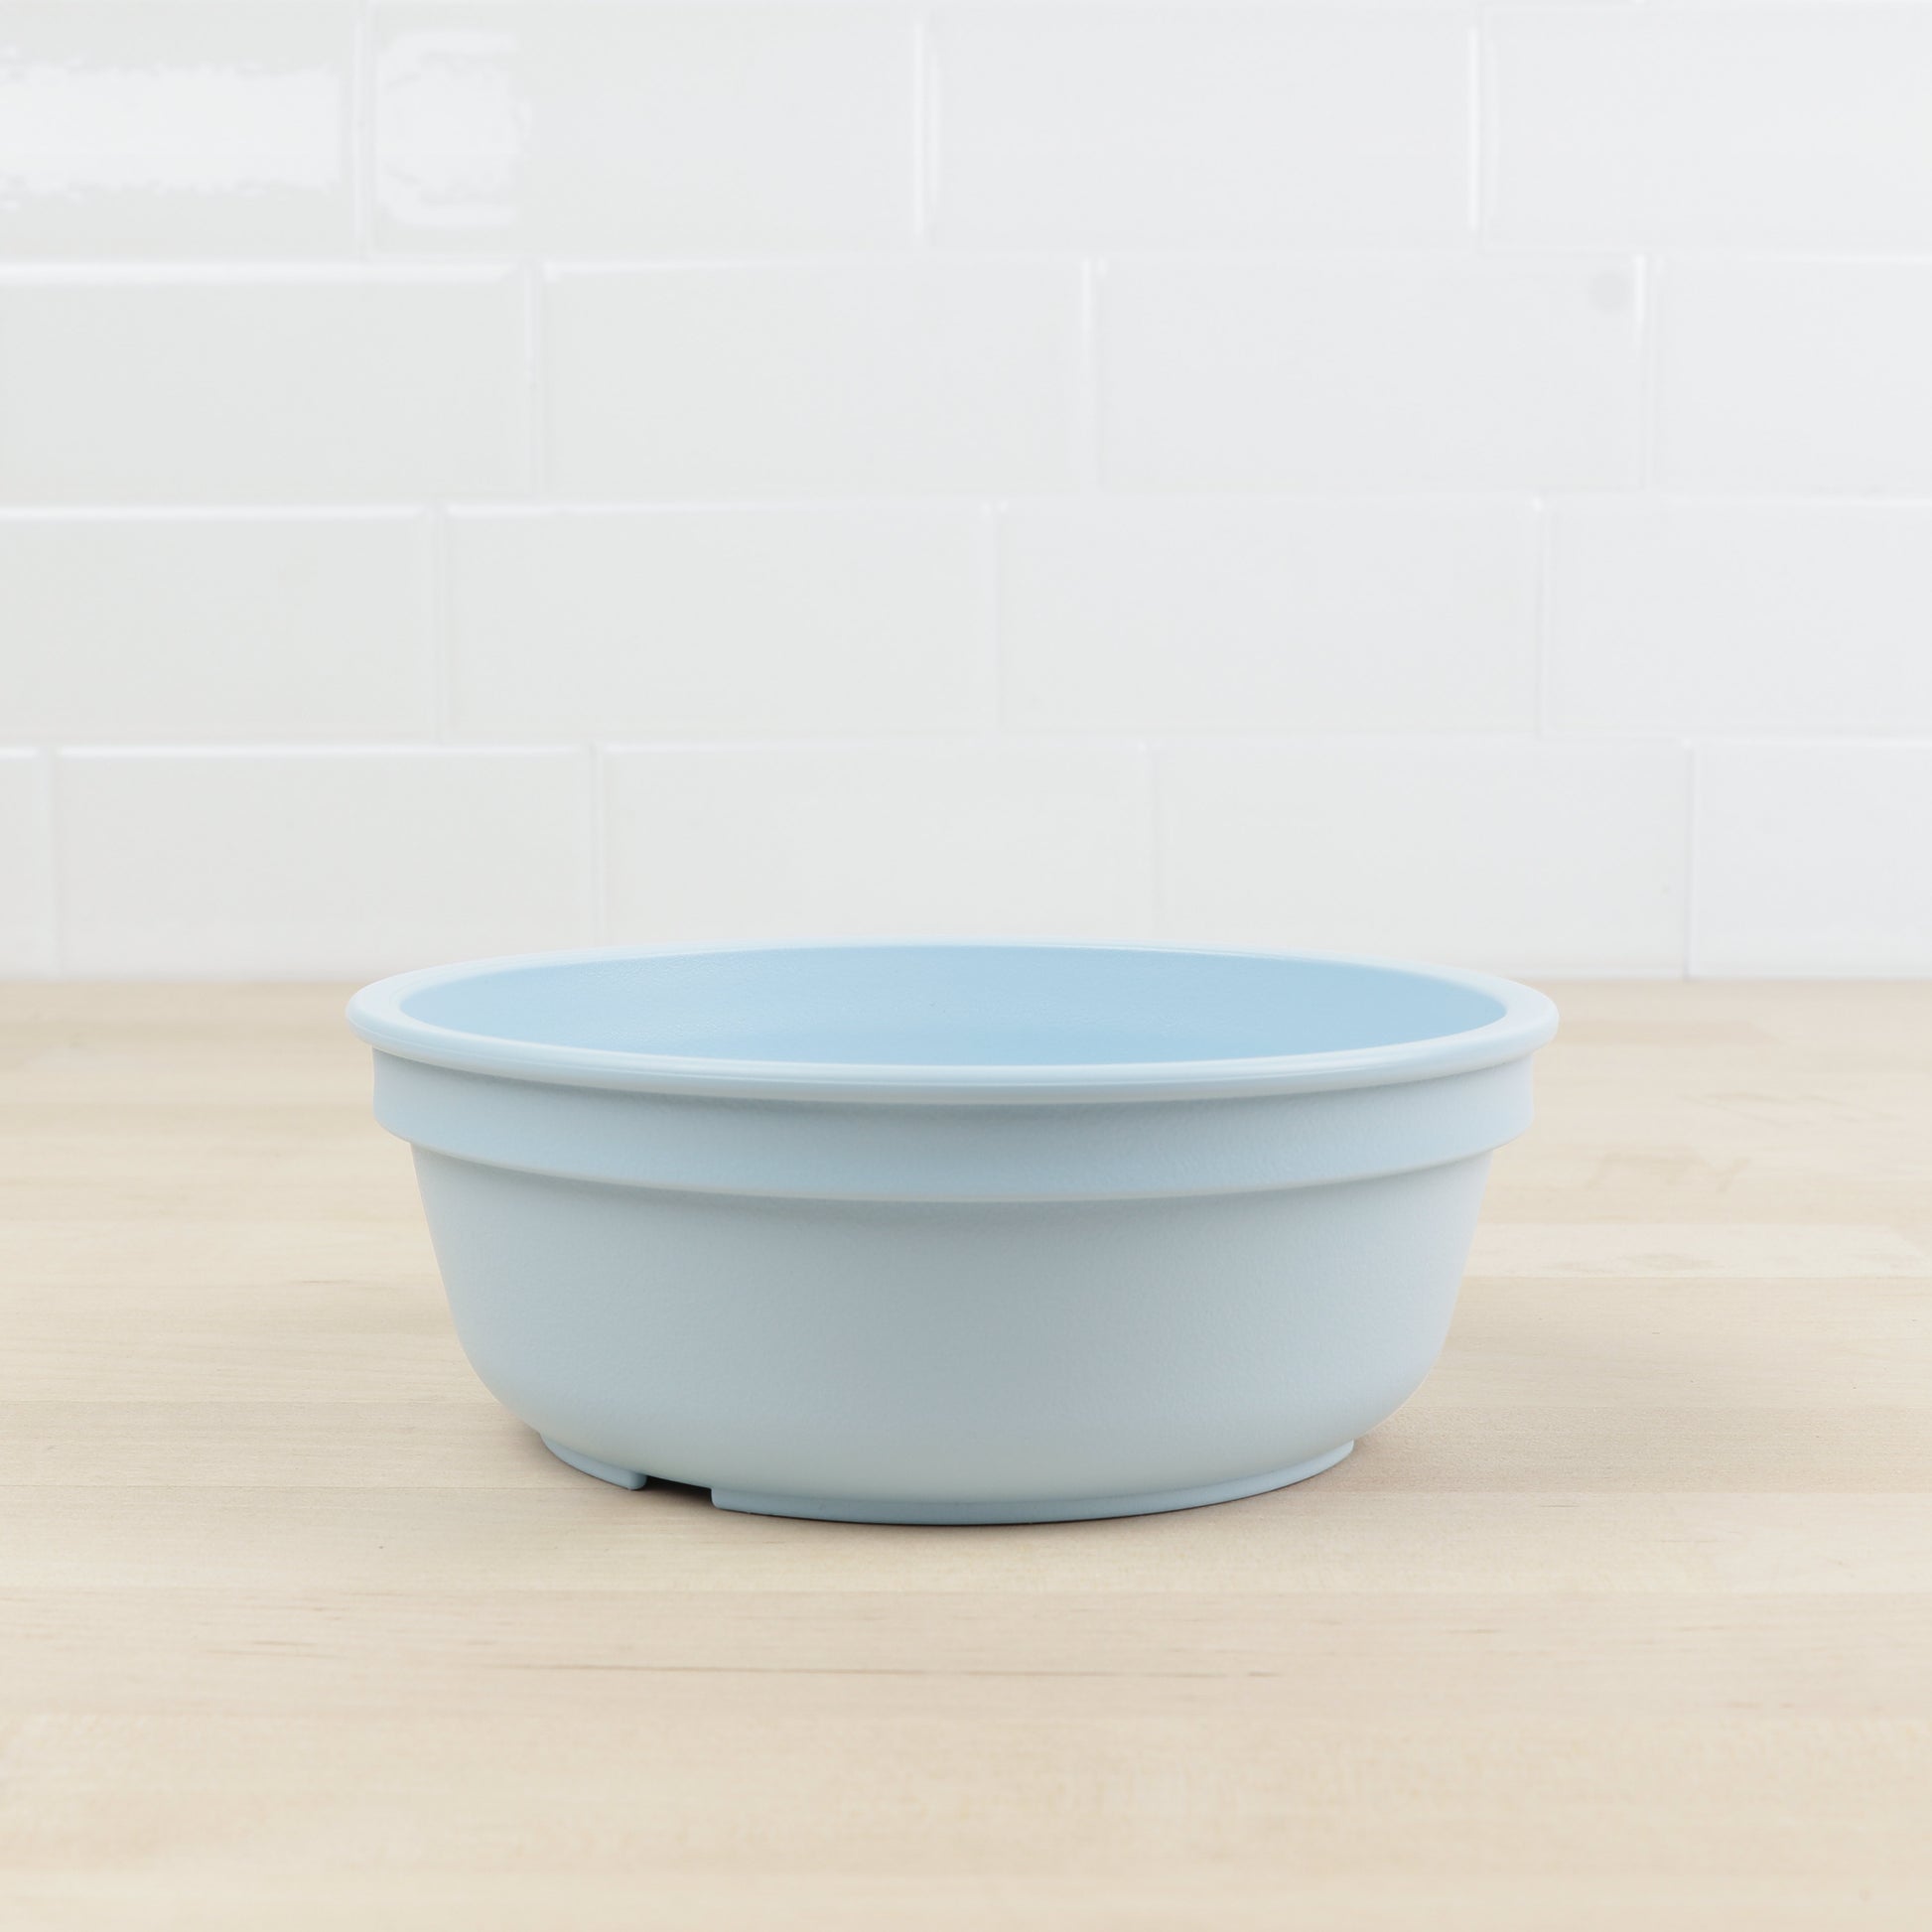 Re-Play Bowl | Standard Size in Ice Blue from Bear & Moo